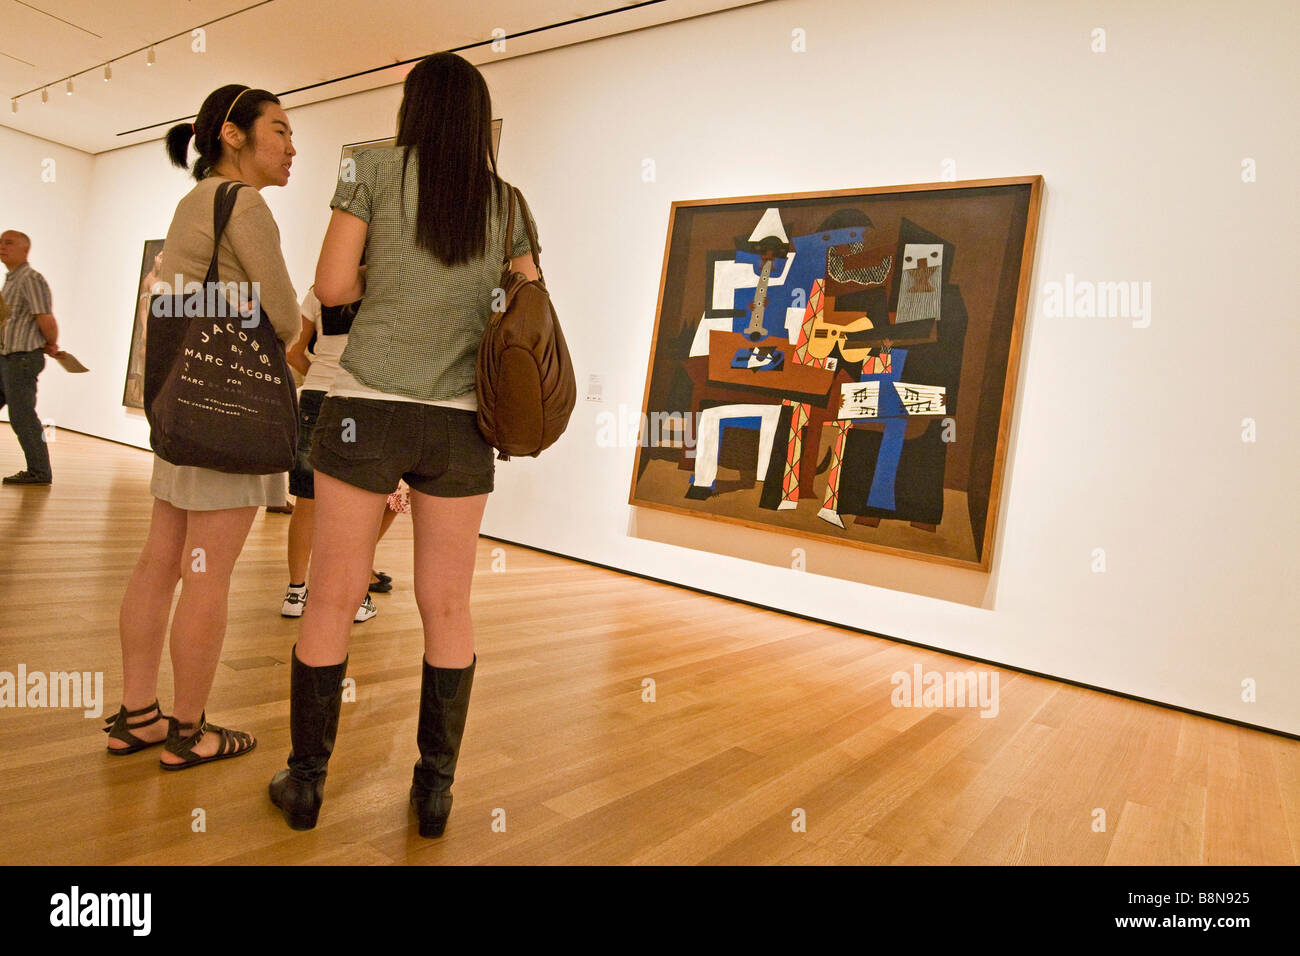 Visitors viewing a painting at the Museum of modern art Stock Photo